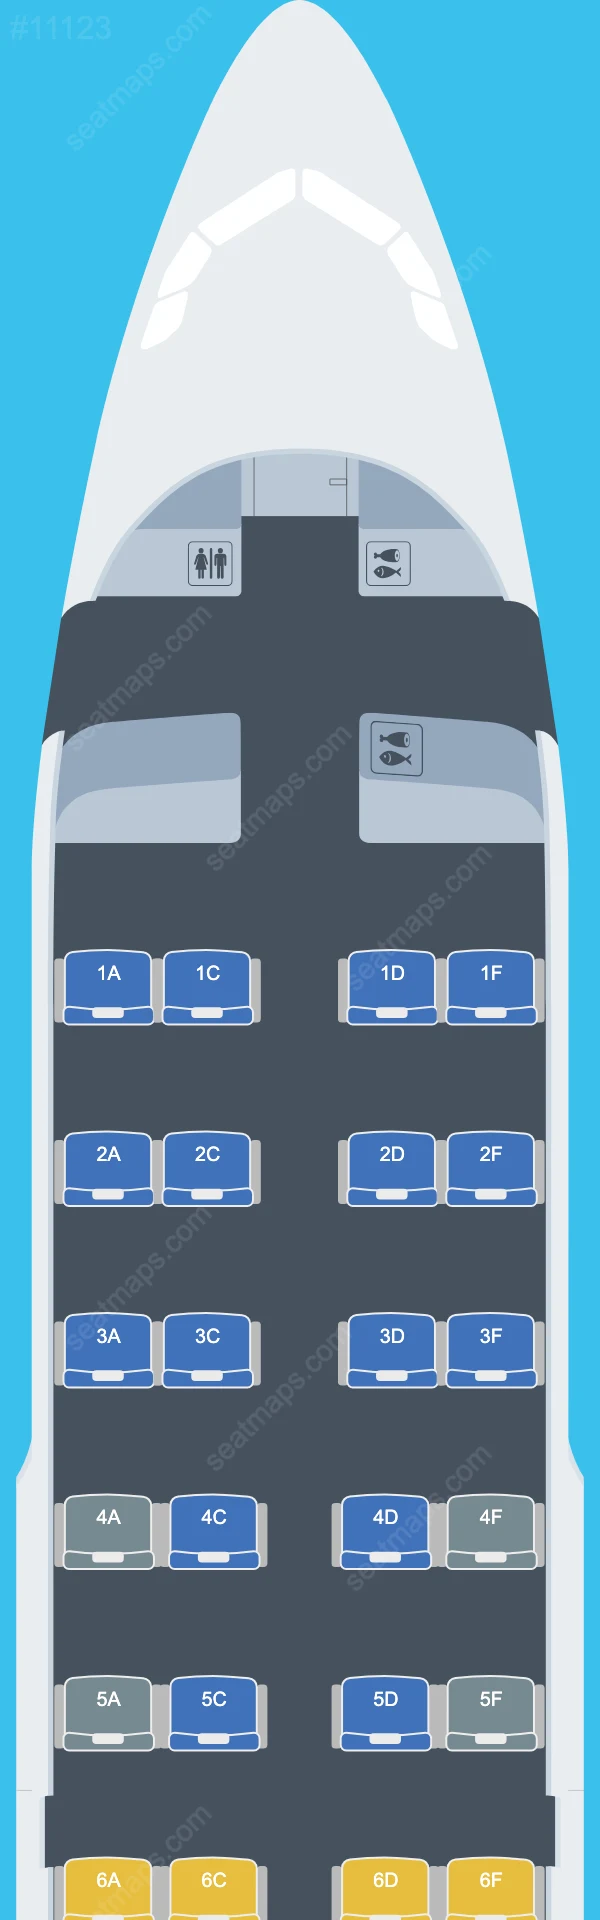 Skytraders Airbus A319-100 seatmap mobile preview